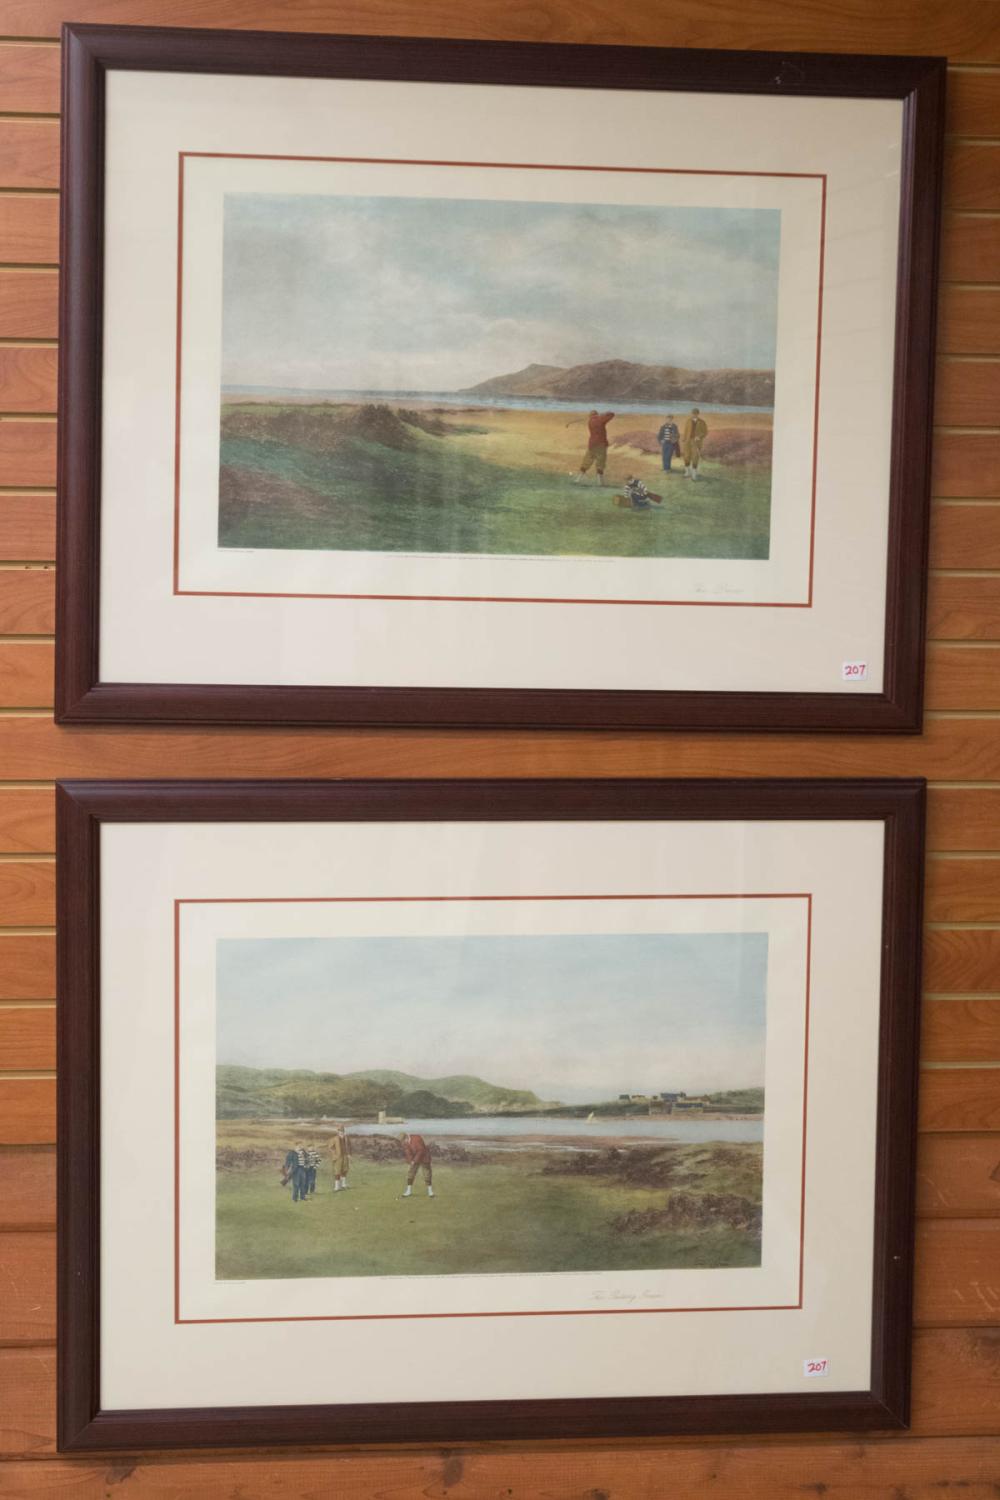 TWO GOLF PRINTS AFTER DOUGLAS ADAMSTWO